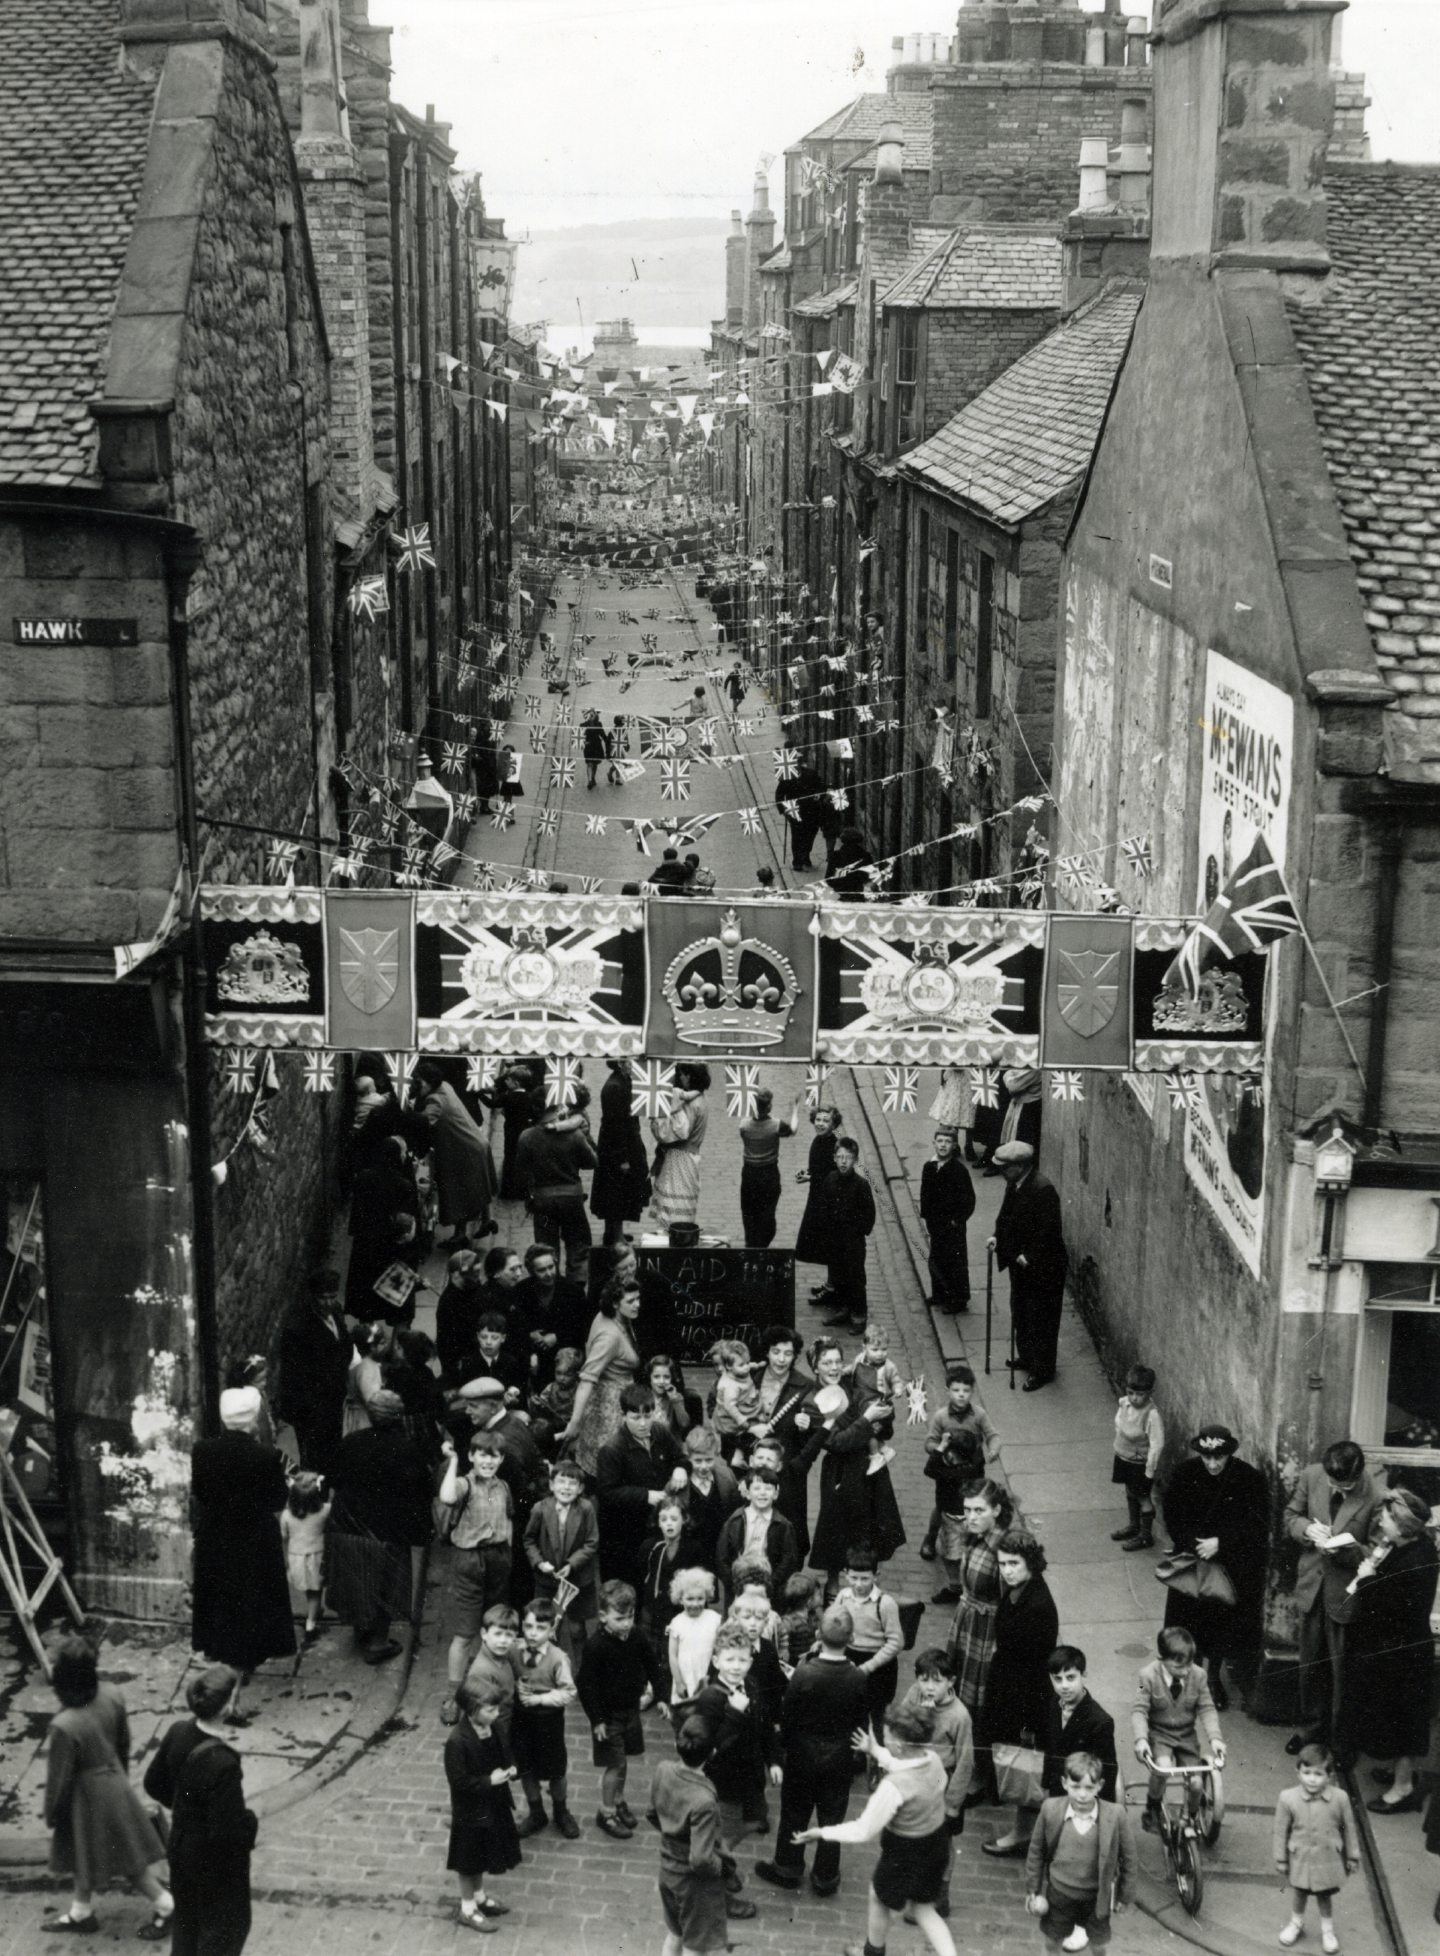 Bernard Street in Dundee held a street party to welcome the coronation in 1953. Image: DC Thomson.